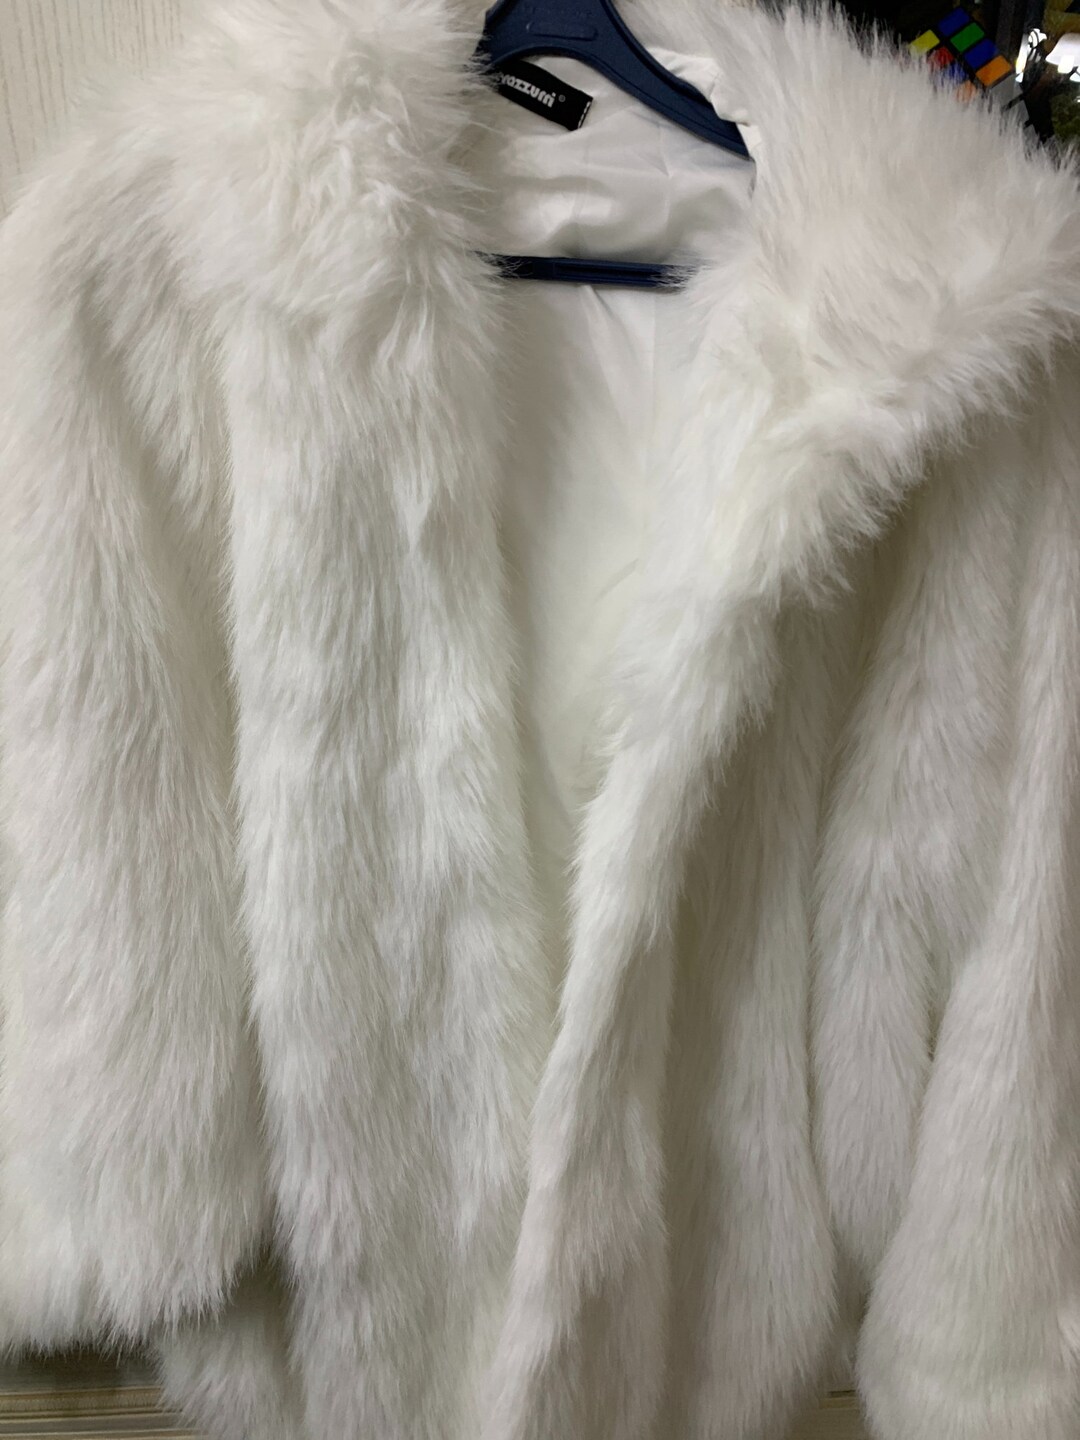 Oversized Faux Fur Fall Fashion Winter Warm Soft Colored - Etsy